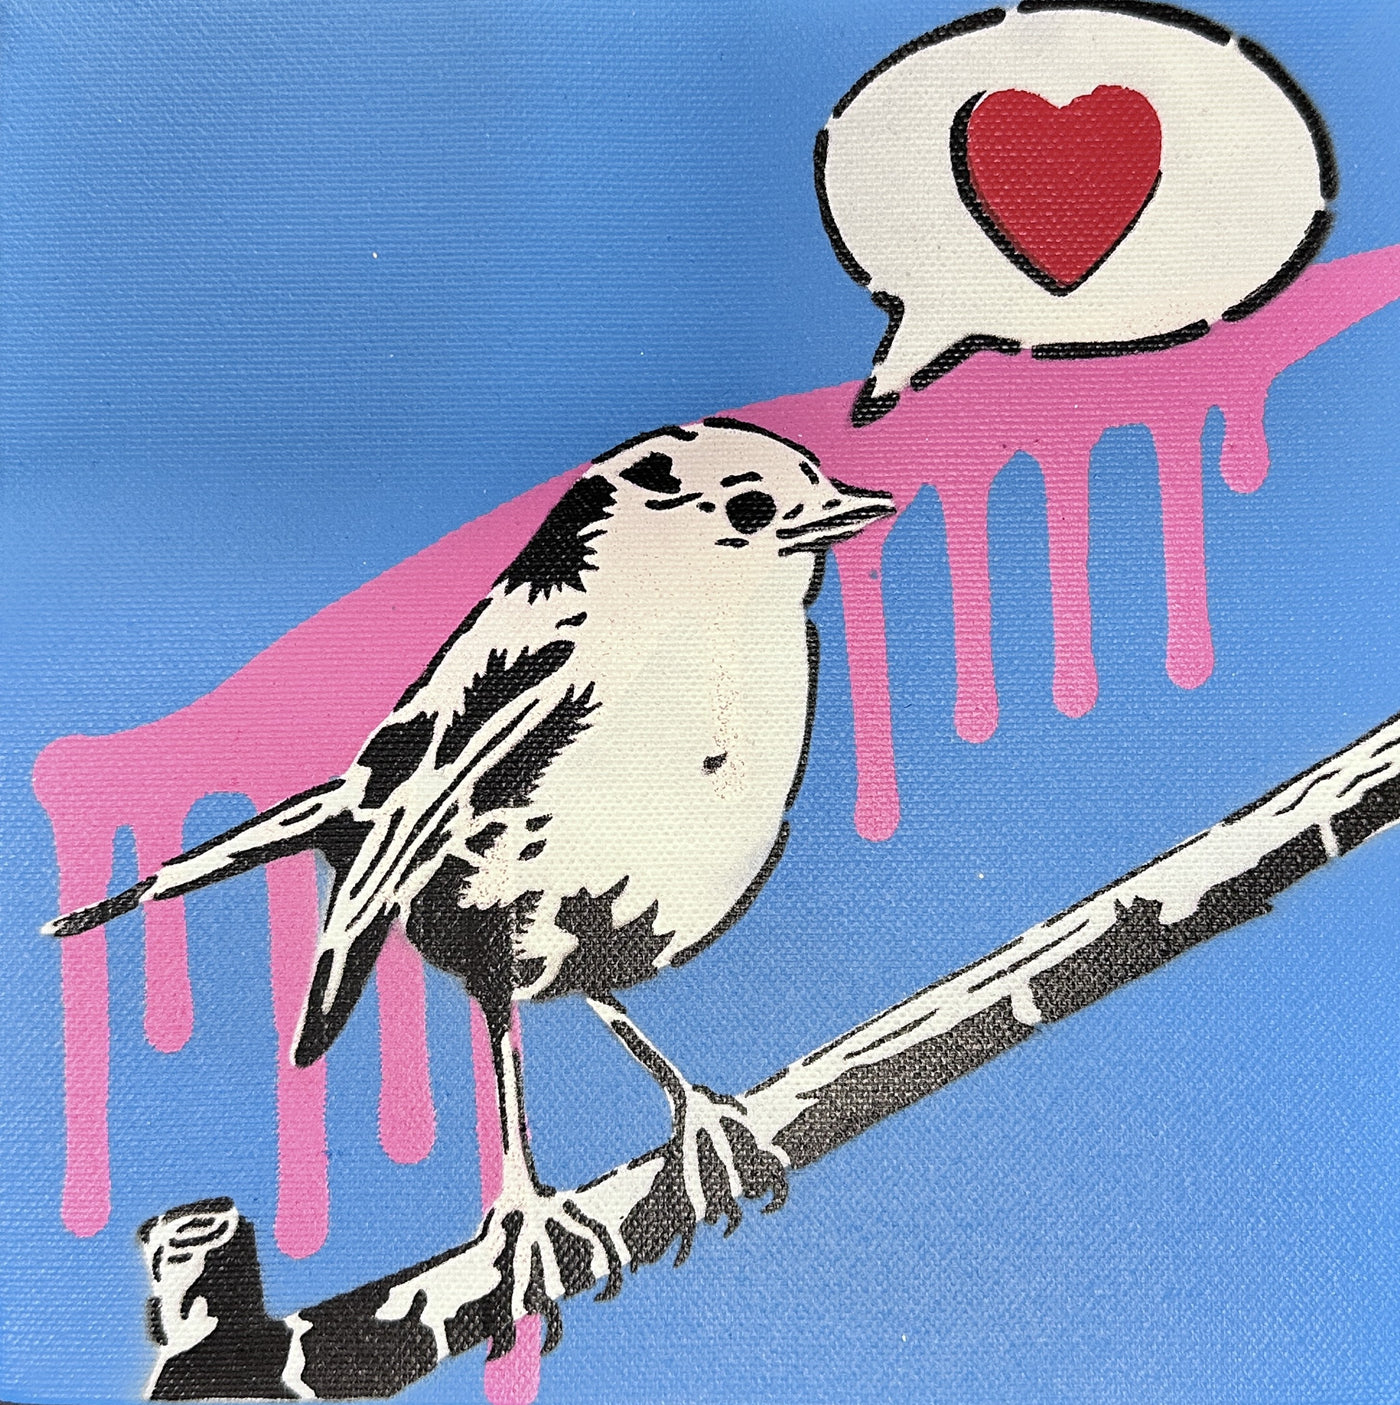 Mr. Savethewall - Free as a Bird - Unique work on canvas - 2023_Blue Pink